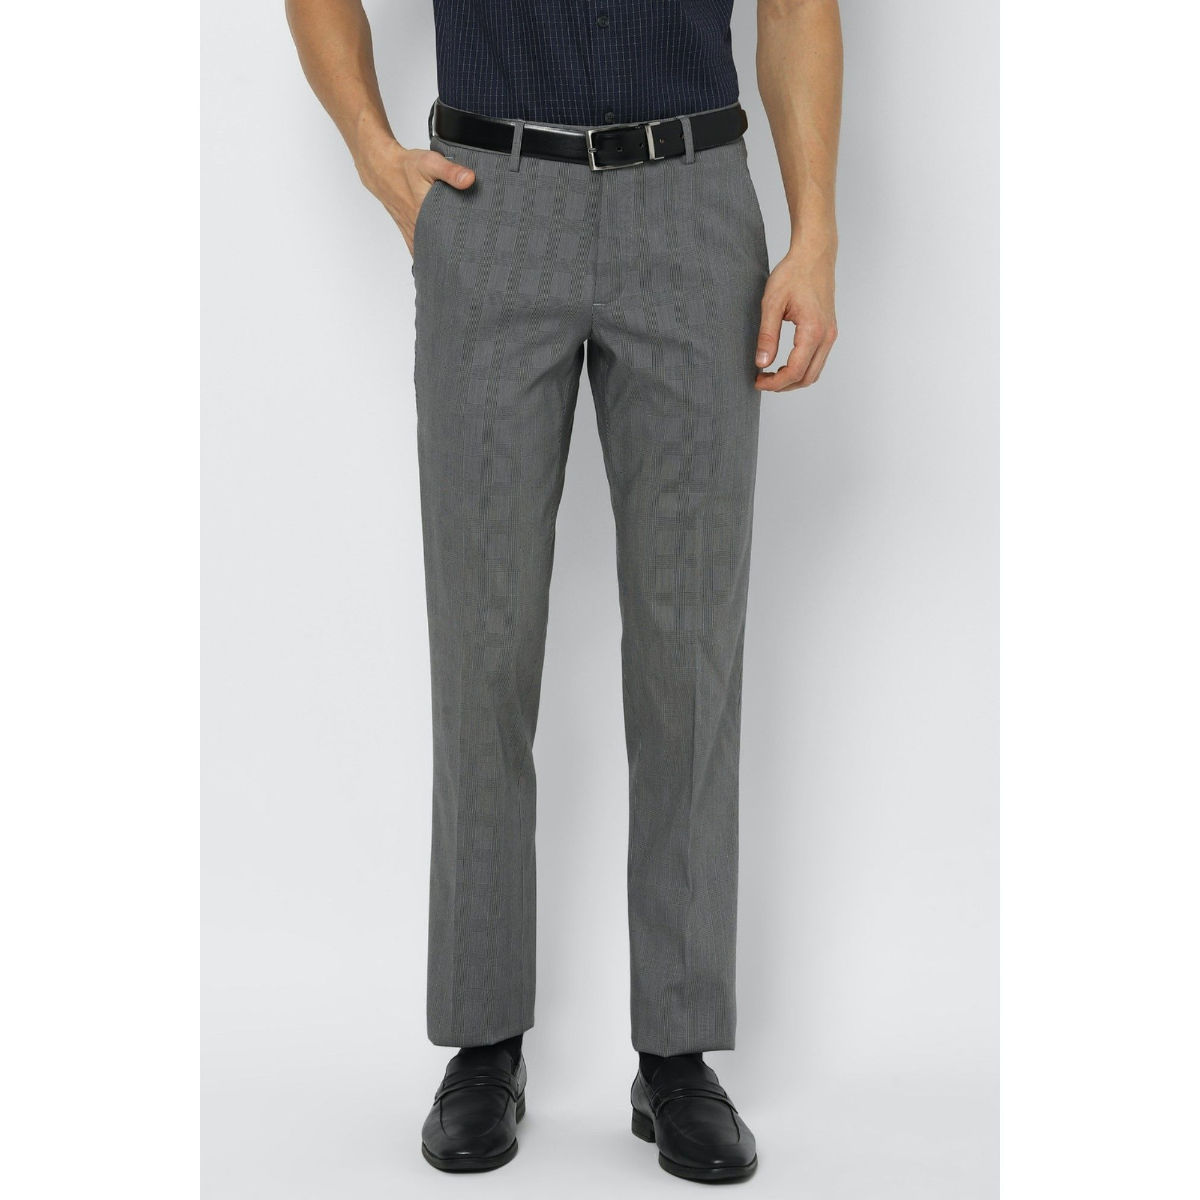 Louis Philippe Men Grey Slim Formal Trousers Buy Louis Philippe Men Grey  Slim Formal Trousers Online at Best Price in India  NykaaMan